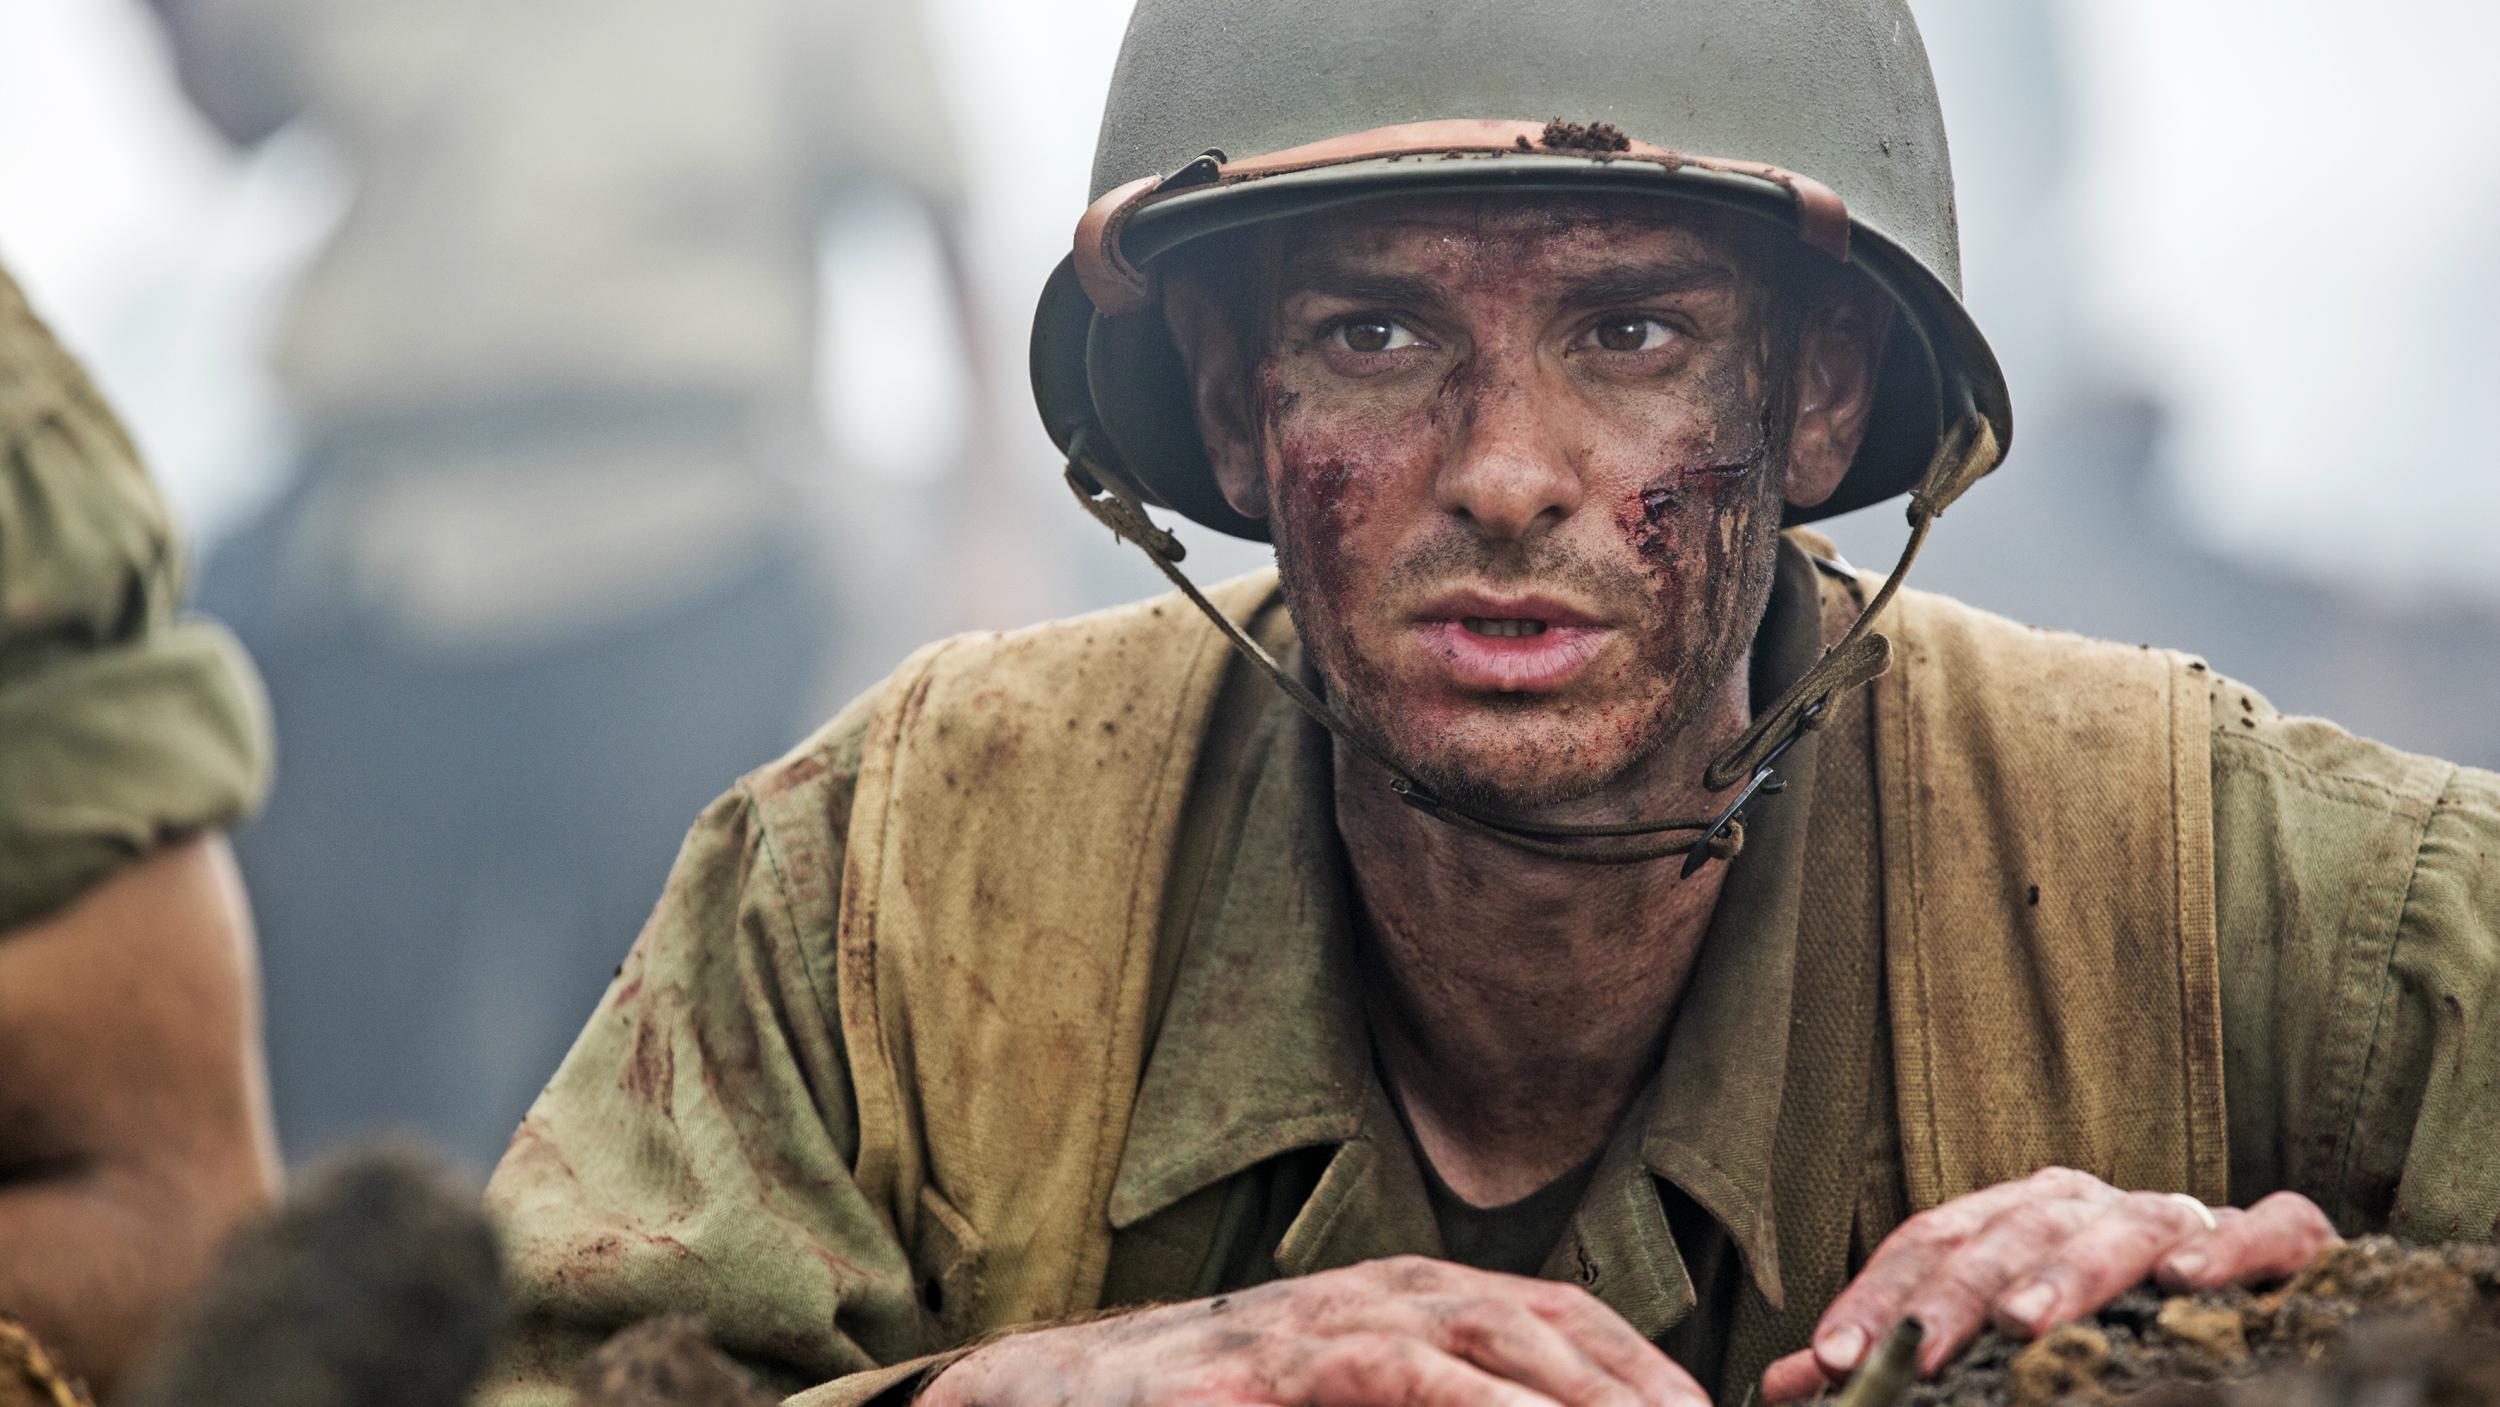 Hacksaw Ridge The men who went to war without firing a single bullet The Independent The Independent pic pic